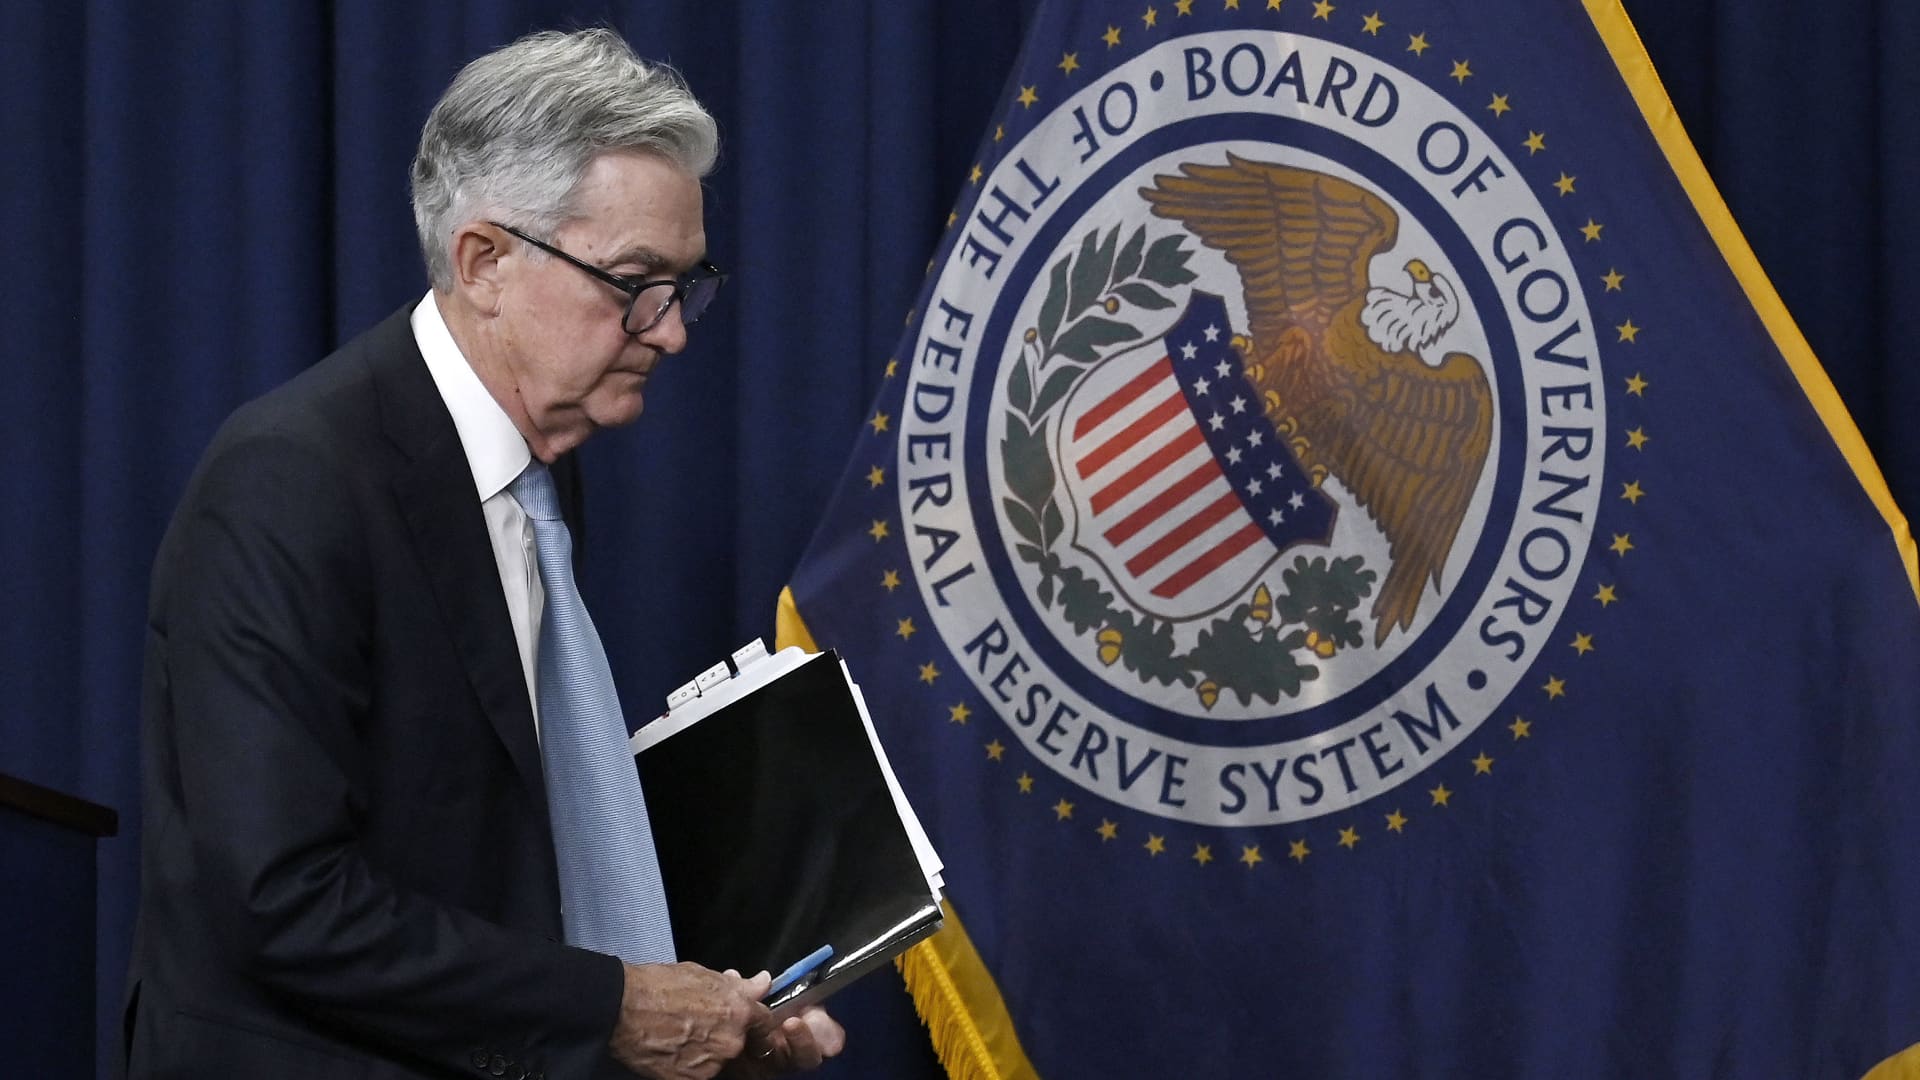 Fed hikes its benchmark interest rate by 0.75 percentage point, the biggest increase since 1994